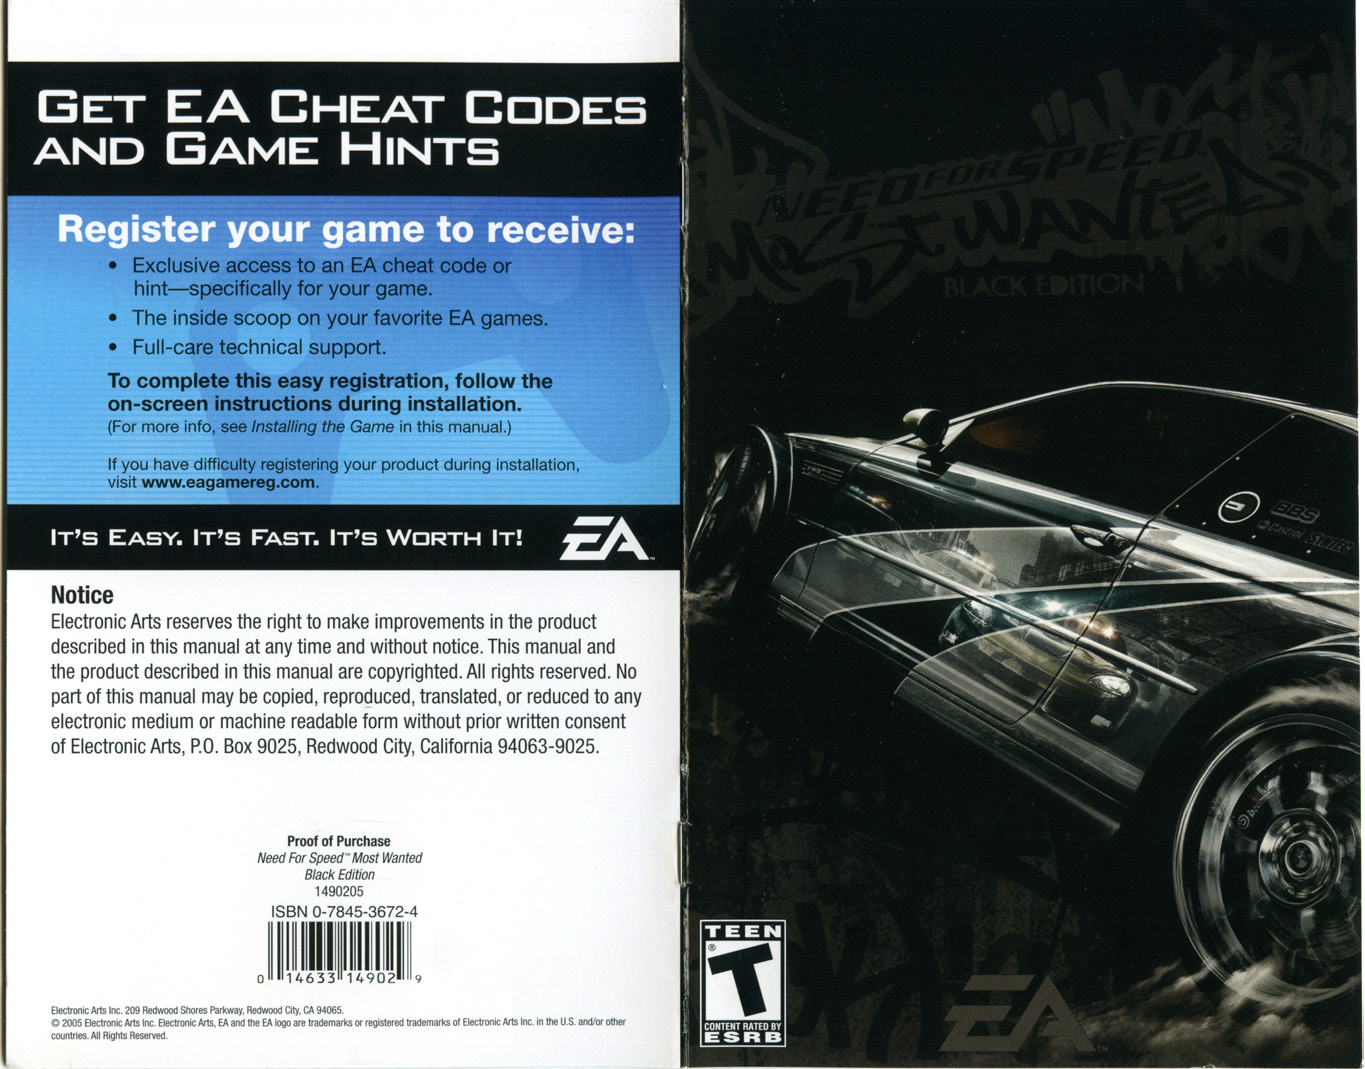 Need for speed most wanted 2005 black edition